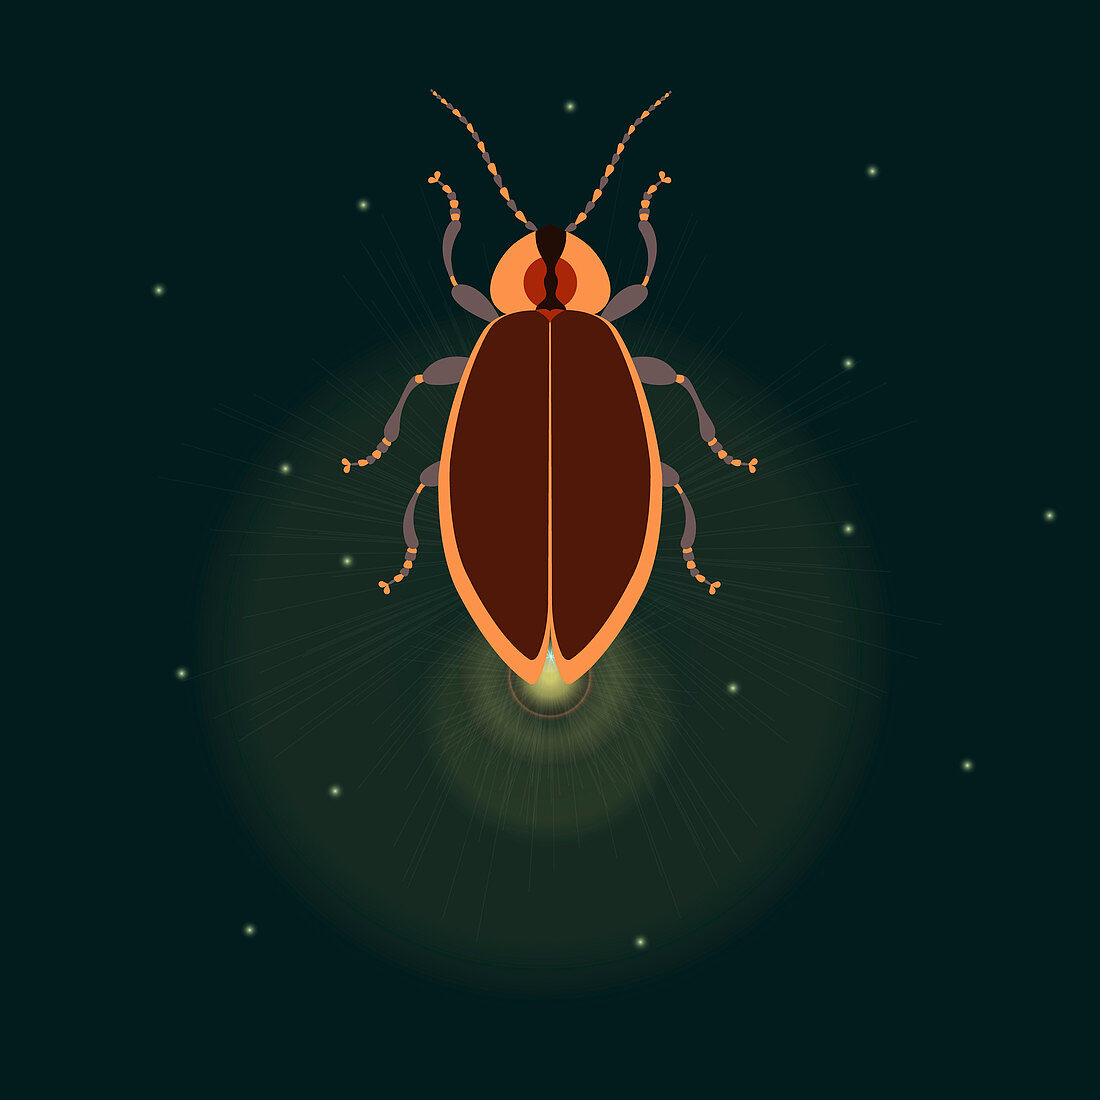 Firefly with closed wings, illustration